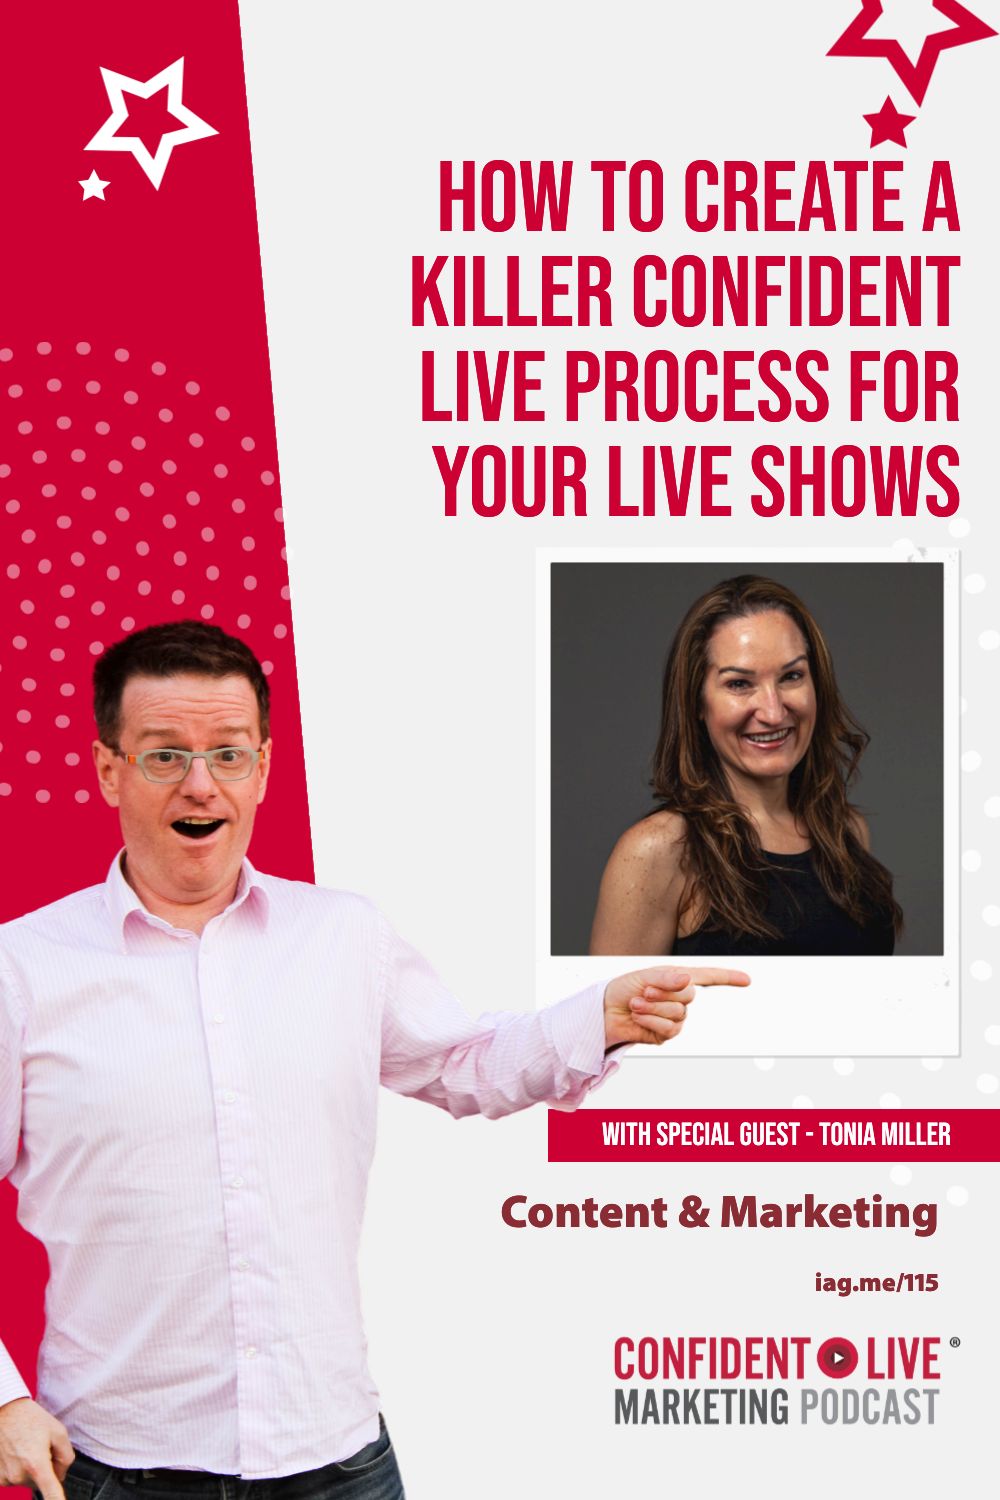 How To Create A Killer Confident Live Process For Your Live Shows